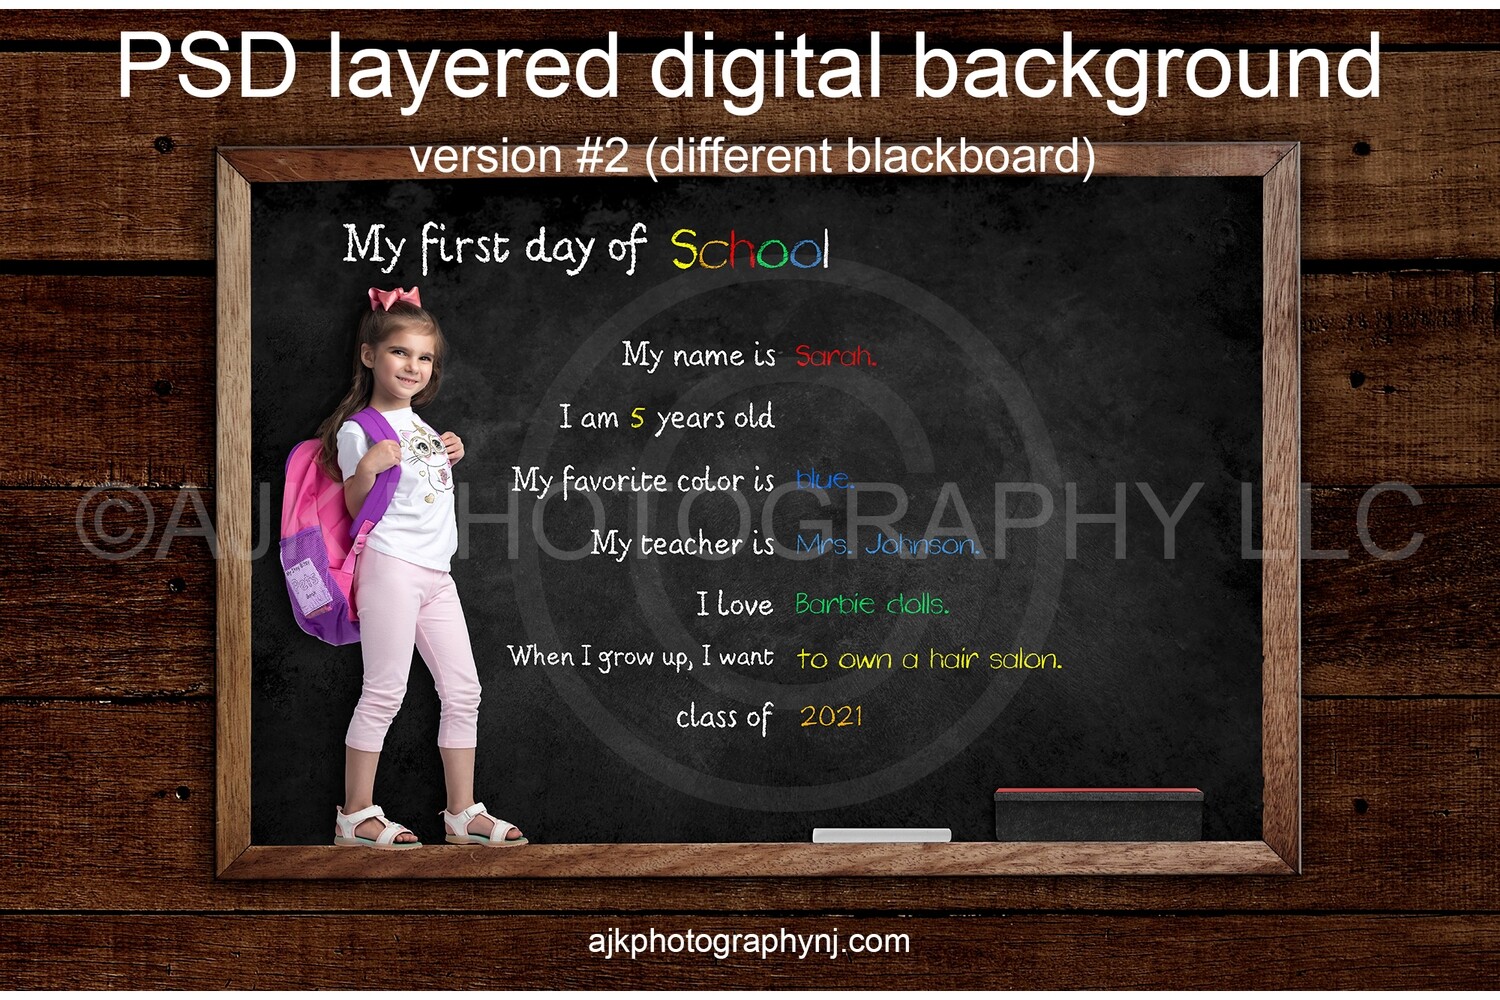 First day of school customizable PSD digital background, back to school backdrop, version #2